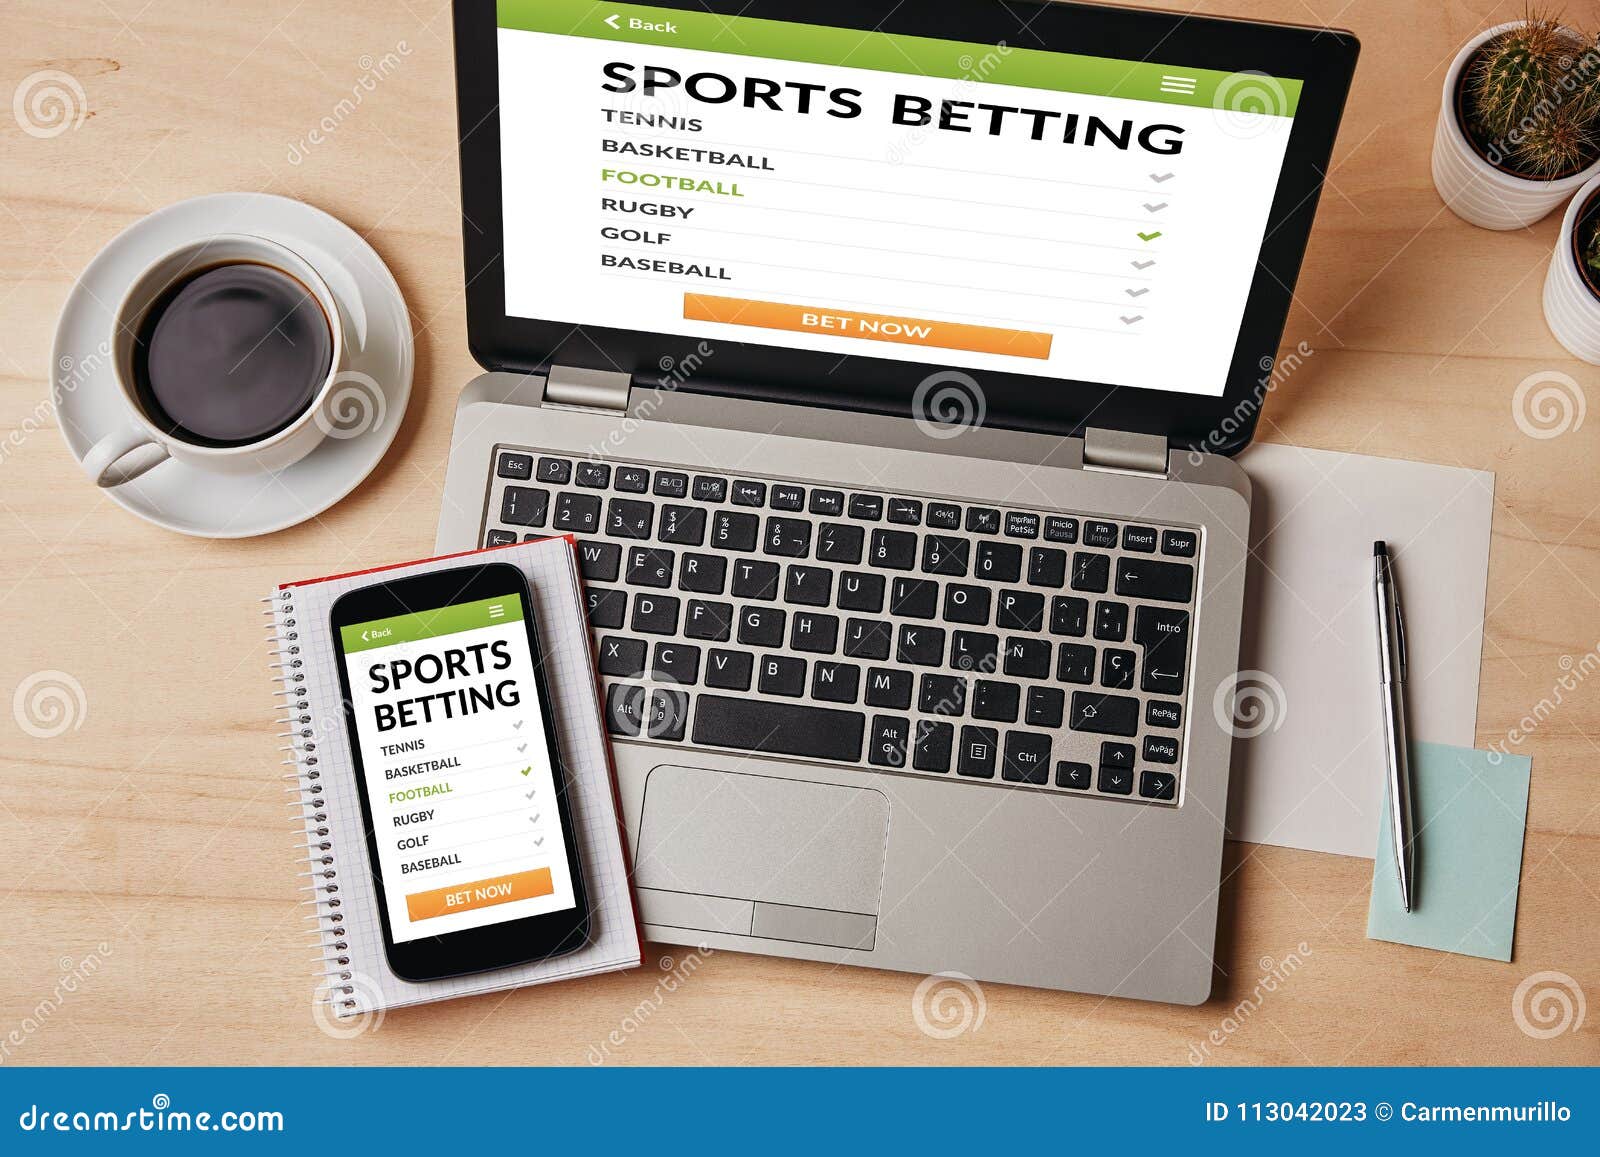 sports betting concept on laptop and smartphone screen